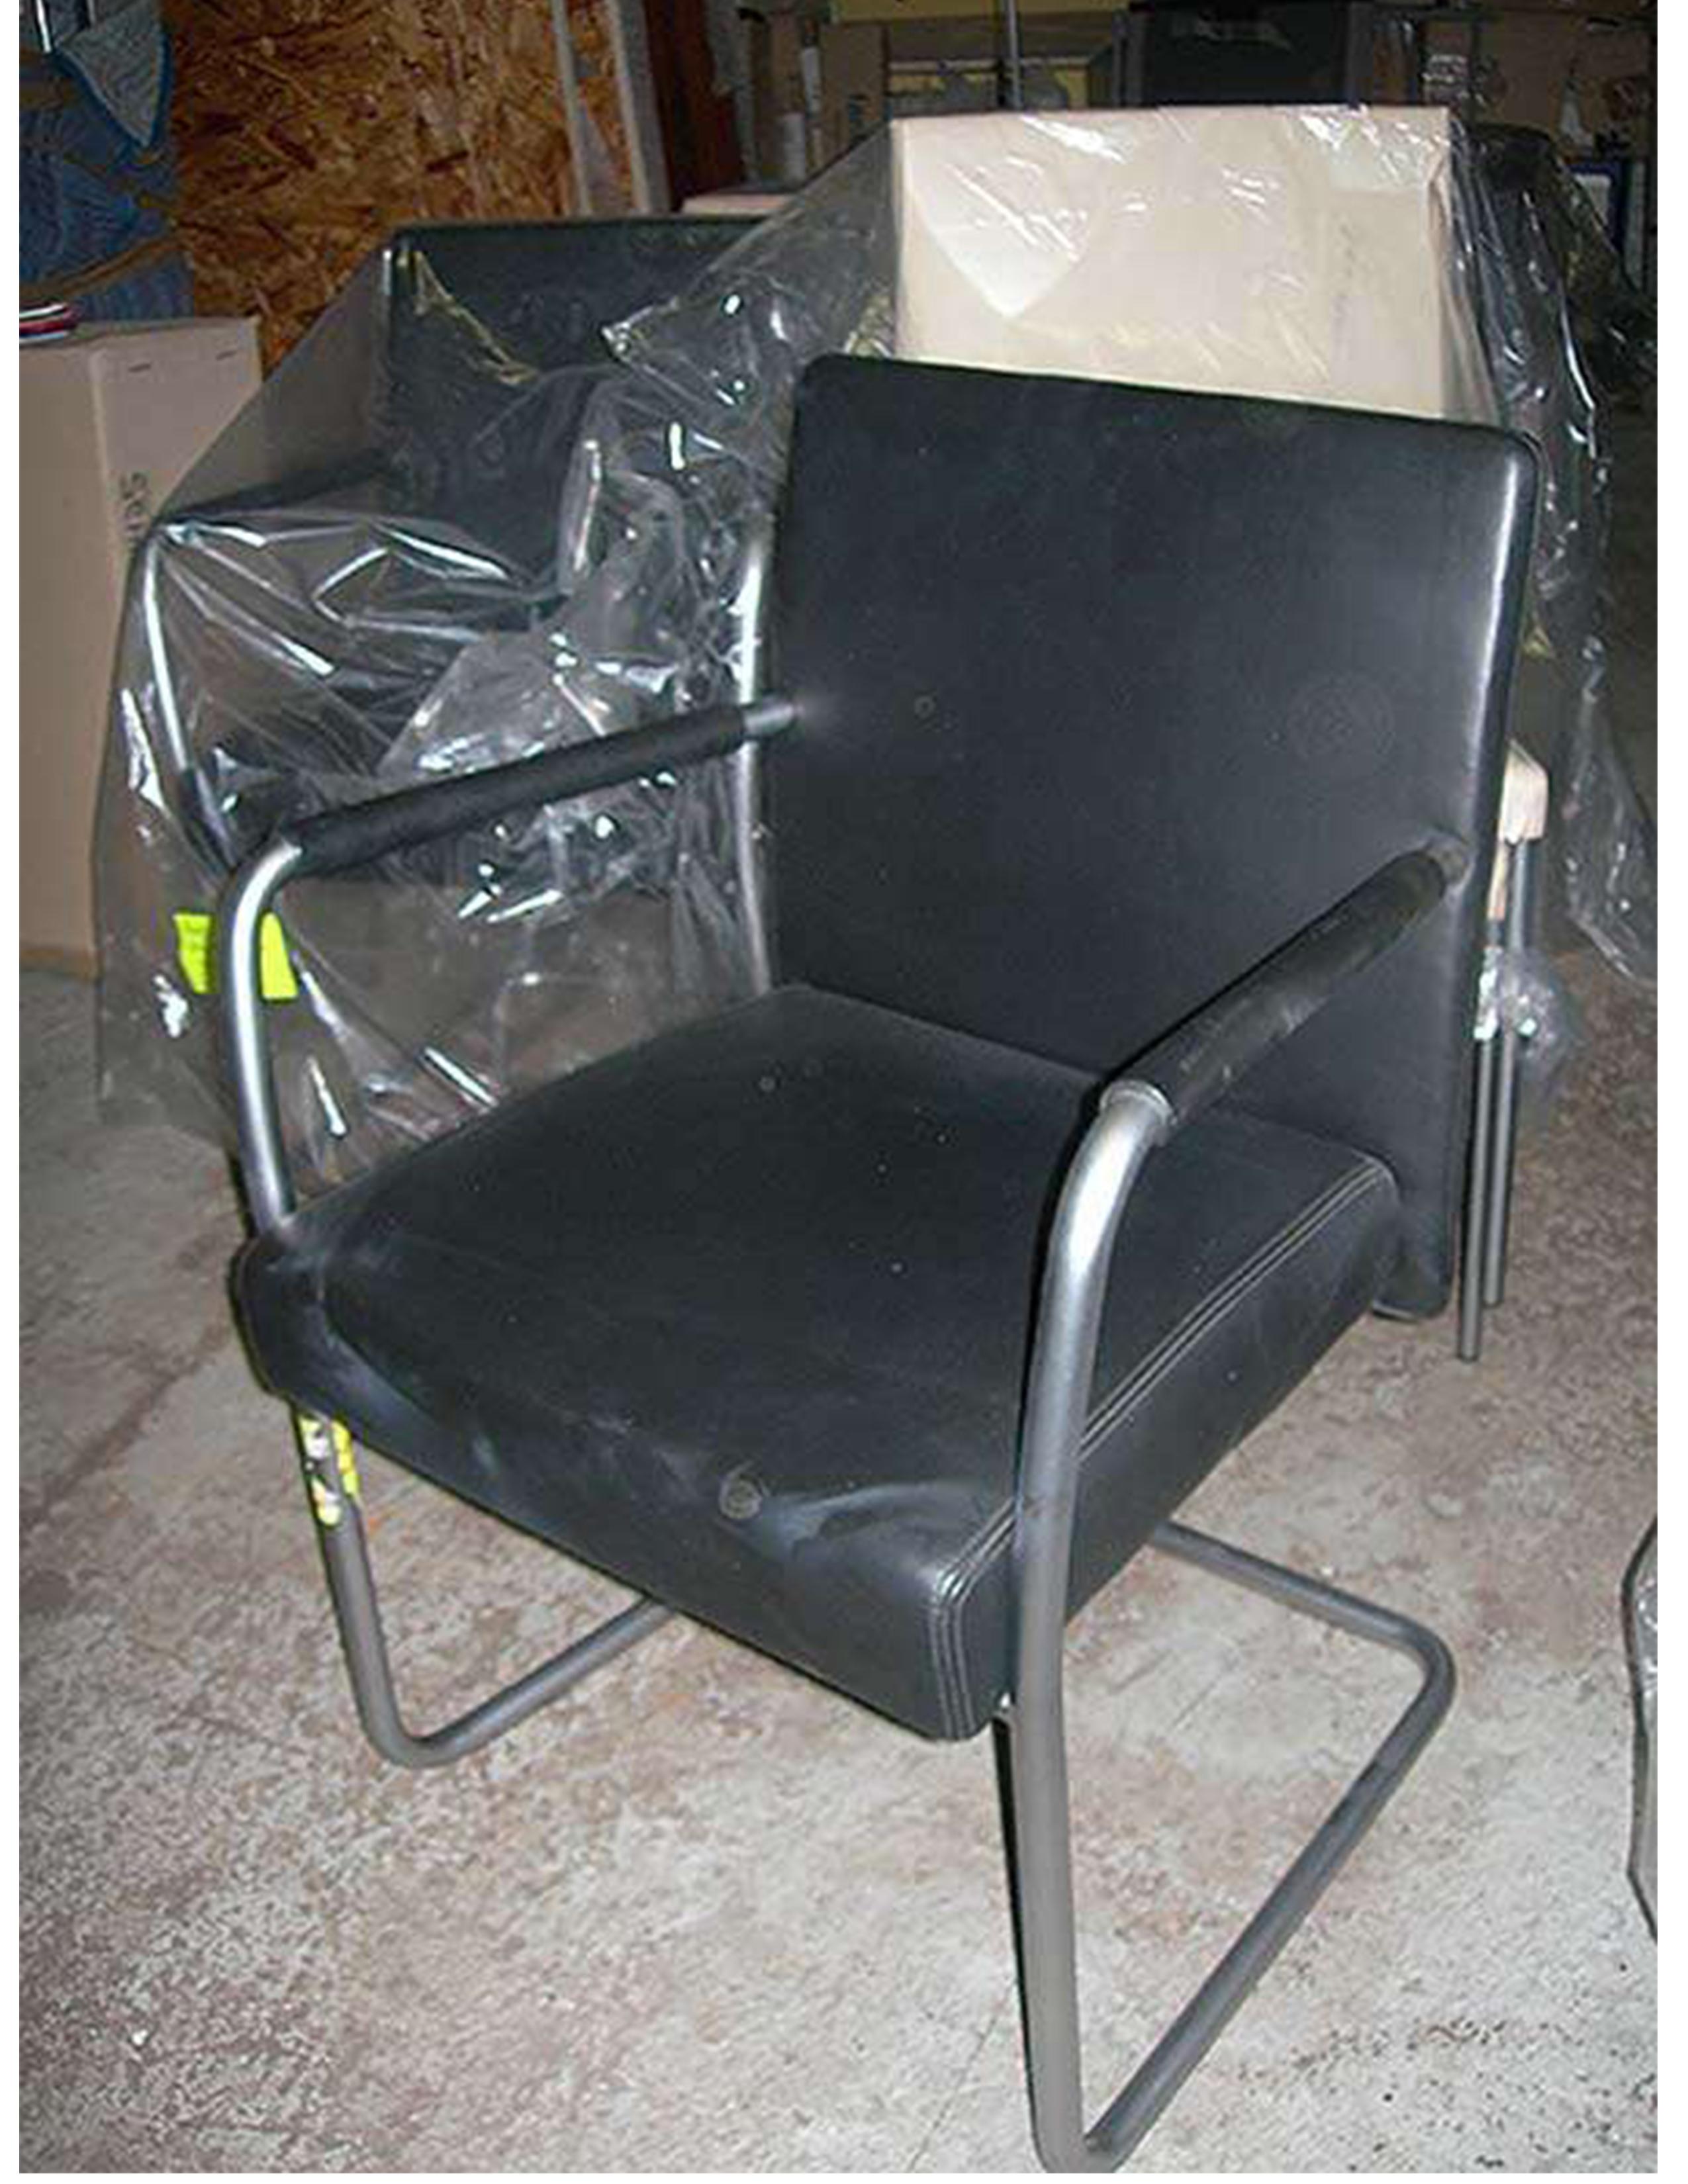 (2) Jason armchairs
Cantilever matt chrome base
Black leather / leather wrapped arms
Model#1519V
Measures: W 23.2